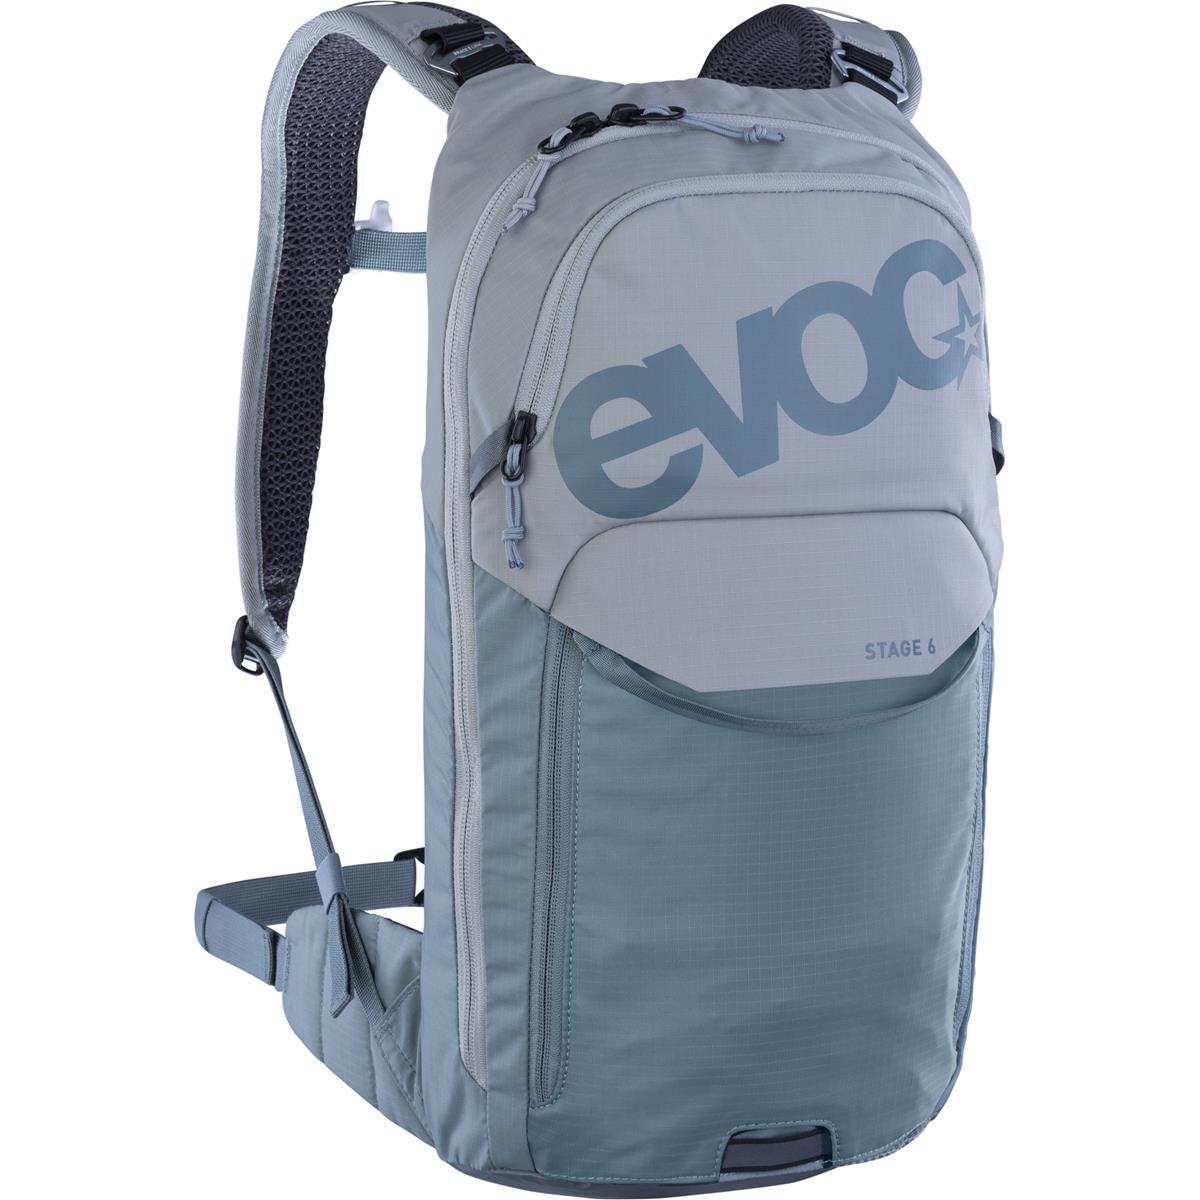 Evoc Backpack with Hydration System Compartment Stage 6 + Stone Steel